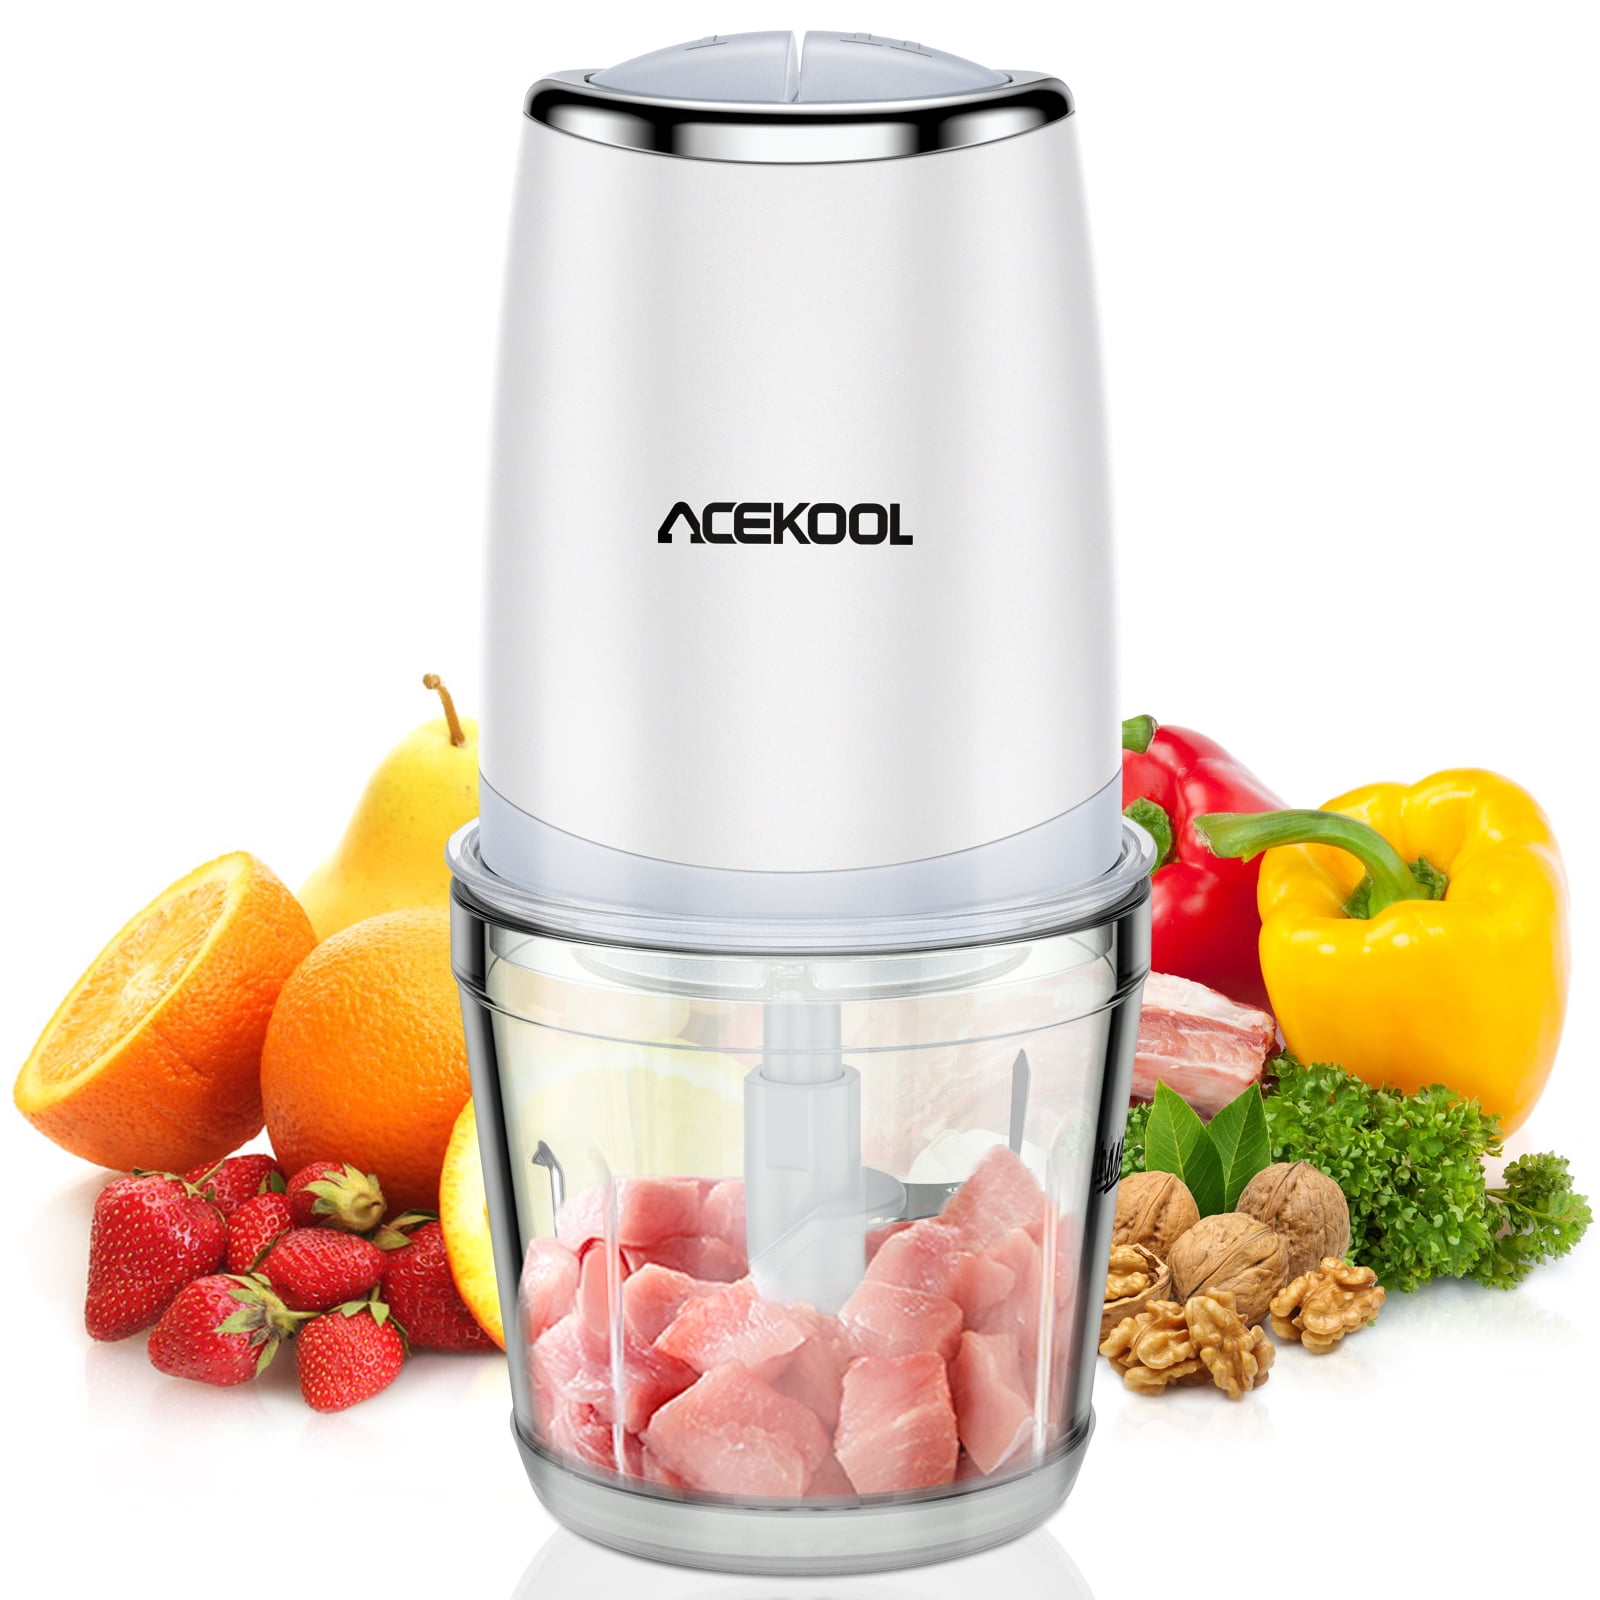 Cook with Color: Effortless Precision - Mini Food Chopper with Stainless Steel Blades for Perfectly Chopped Vegetables, 1.5 Cup, Navy